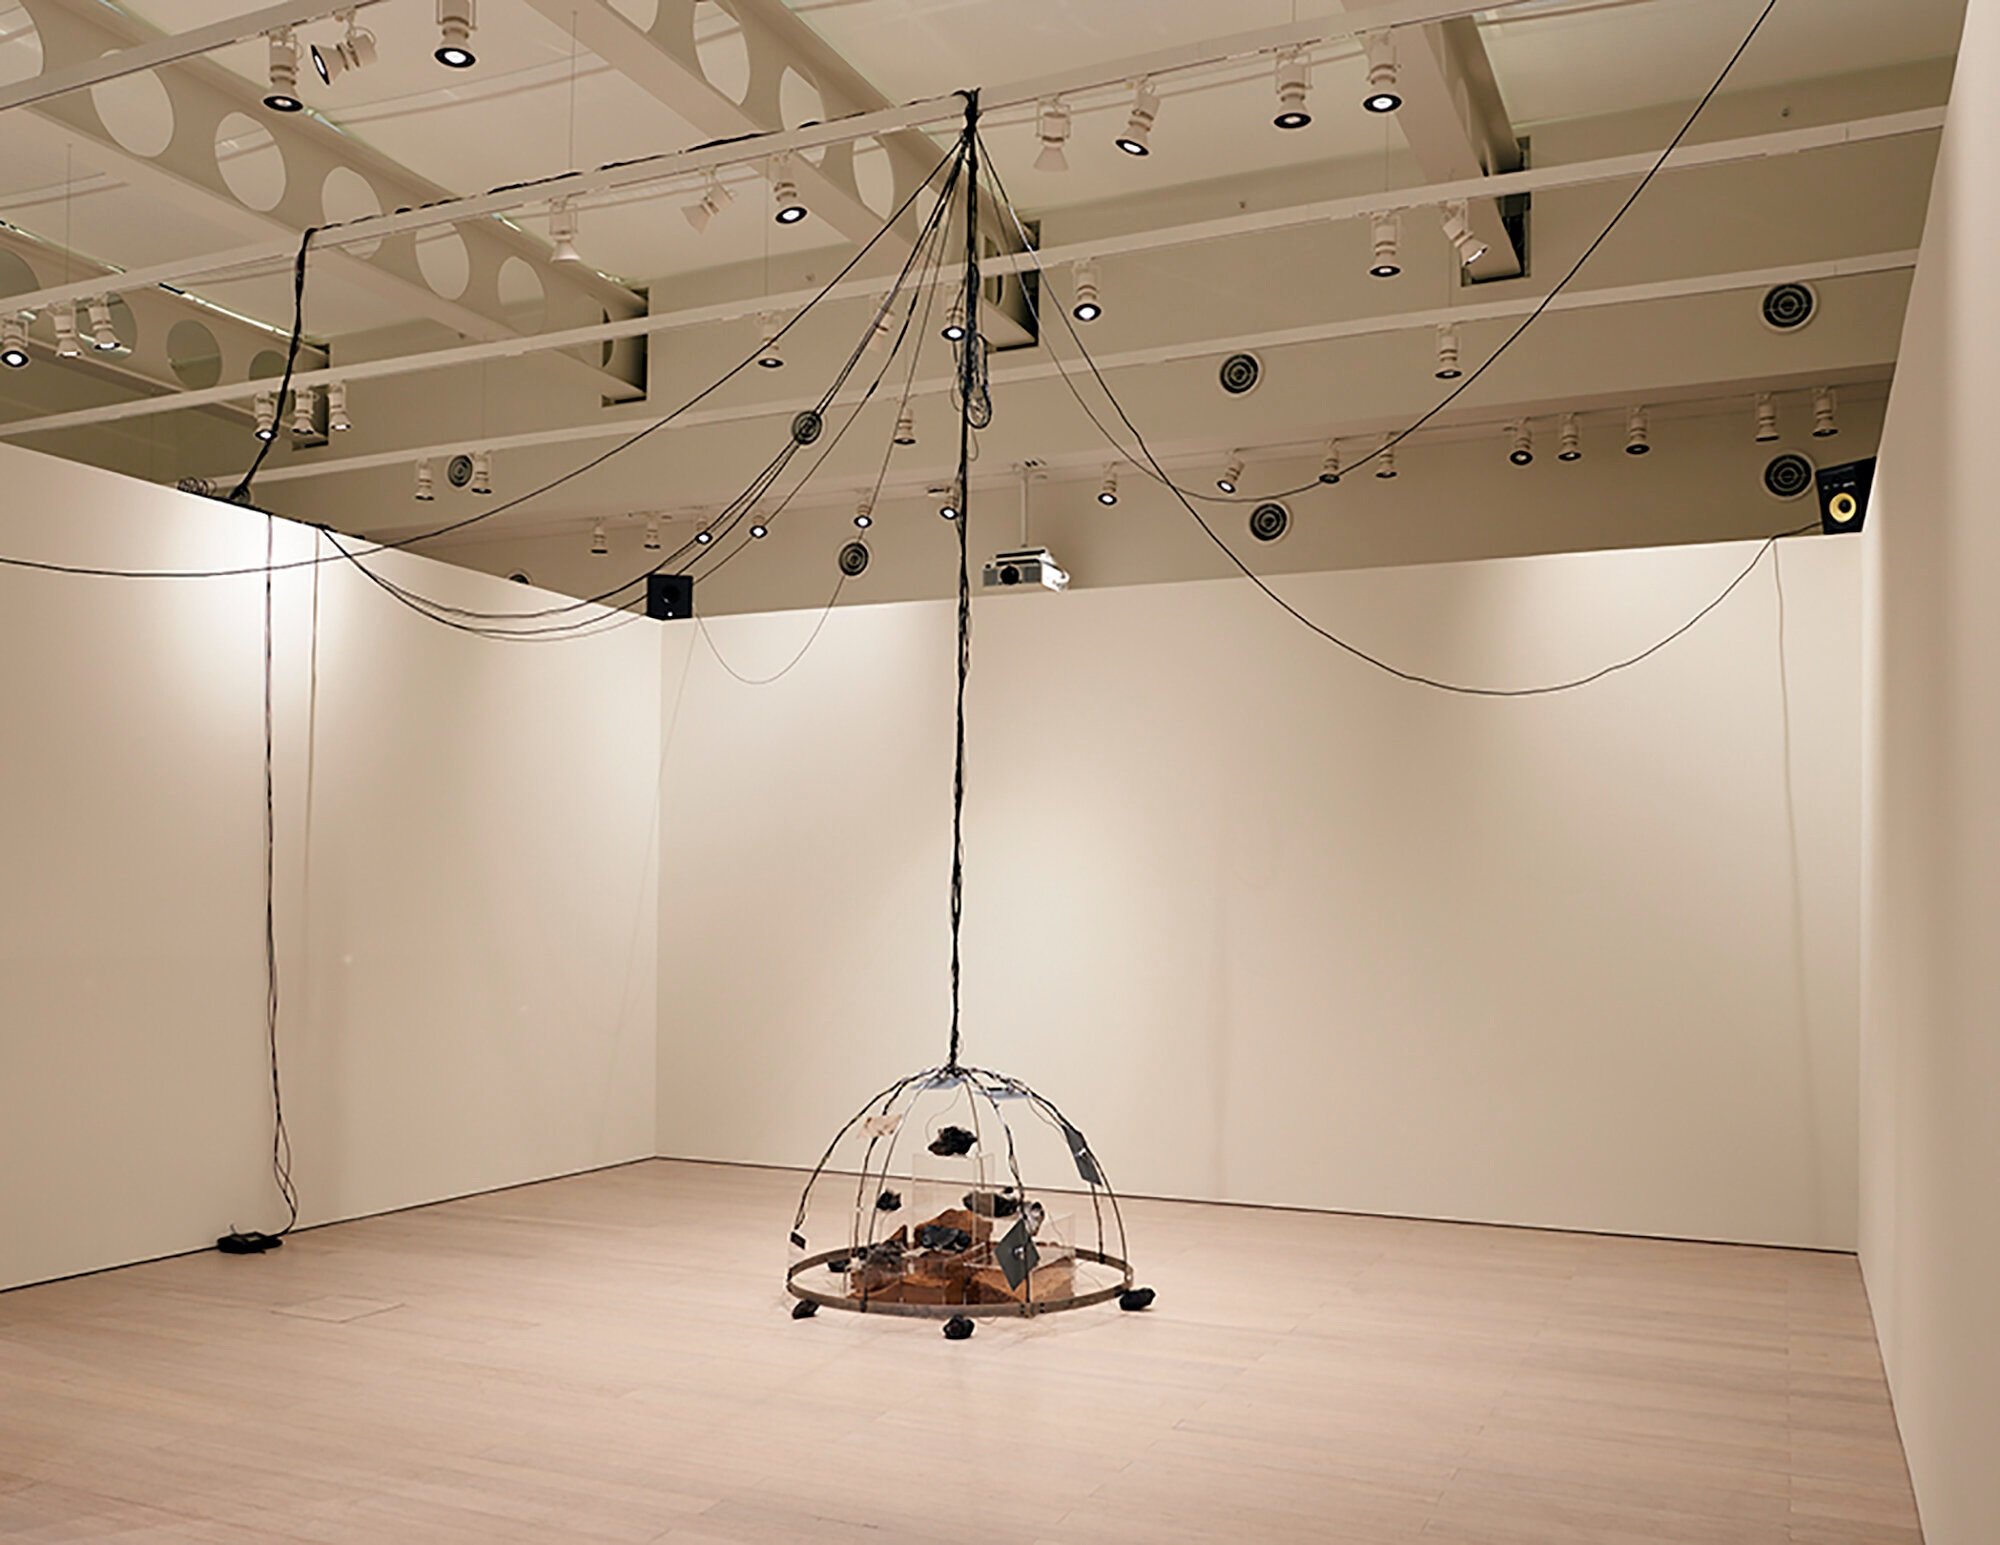  Yixuan Shao and Bicheng Liang  Left Without The Means To Move , 2021 Lava rocks, anodized aluminum, bone conductors, pit fired wild clay and sound recorded within, desert soil, amplified microphones, speakers, subwoofers, and other mixed media 204" 